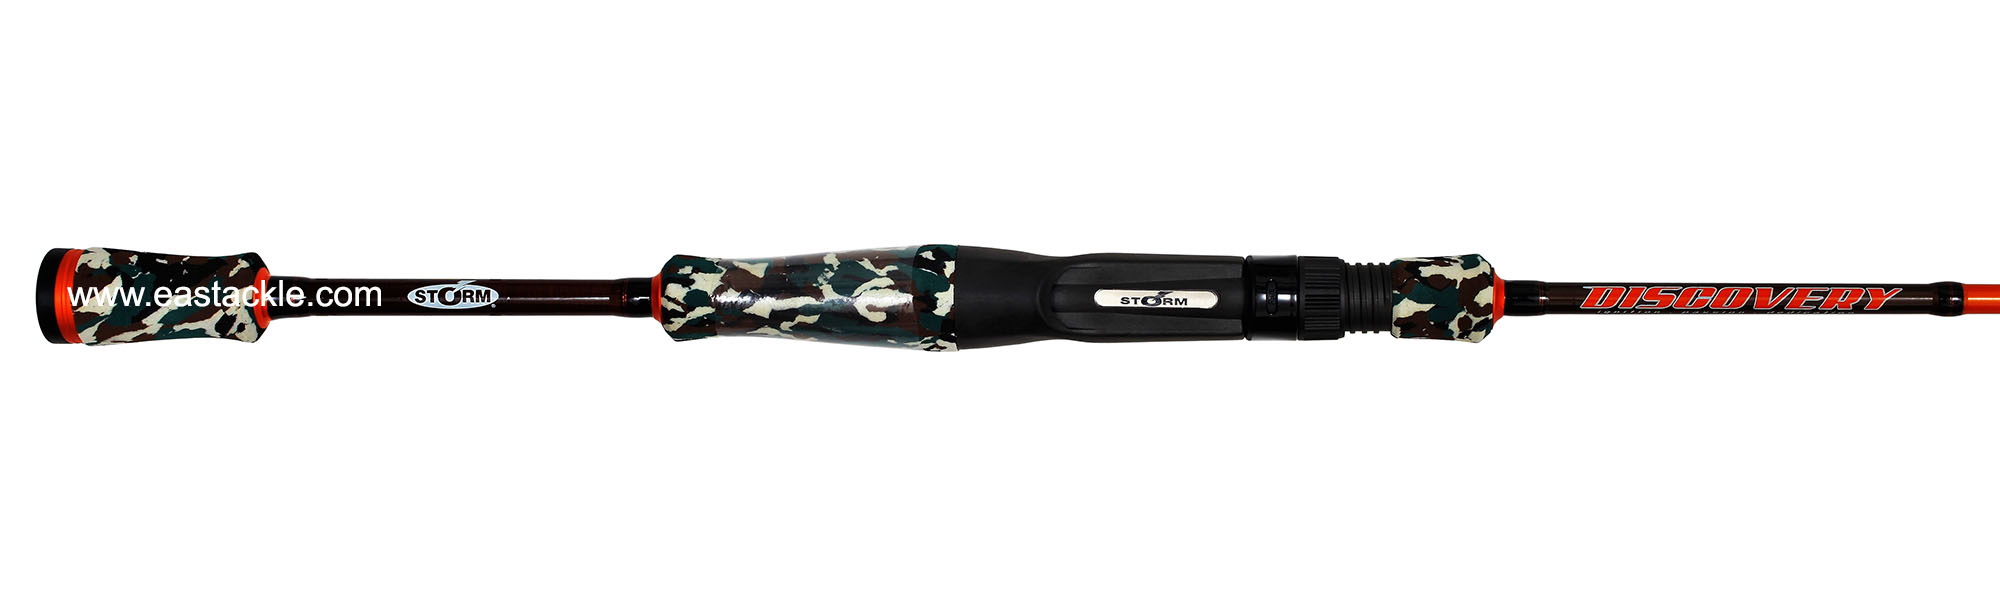 Storm - Discovery - DVC662MH - Bait Casting Rod - Butt to Stripper Guide (Top View) | Eastackle